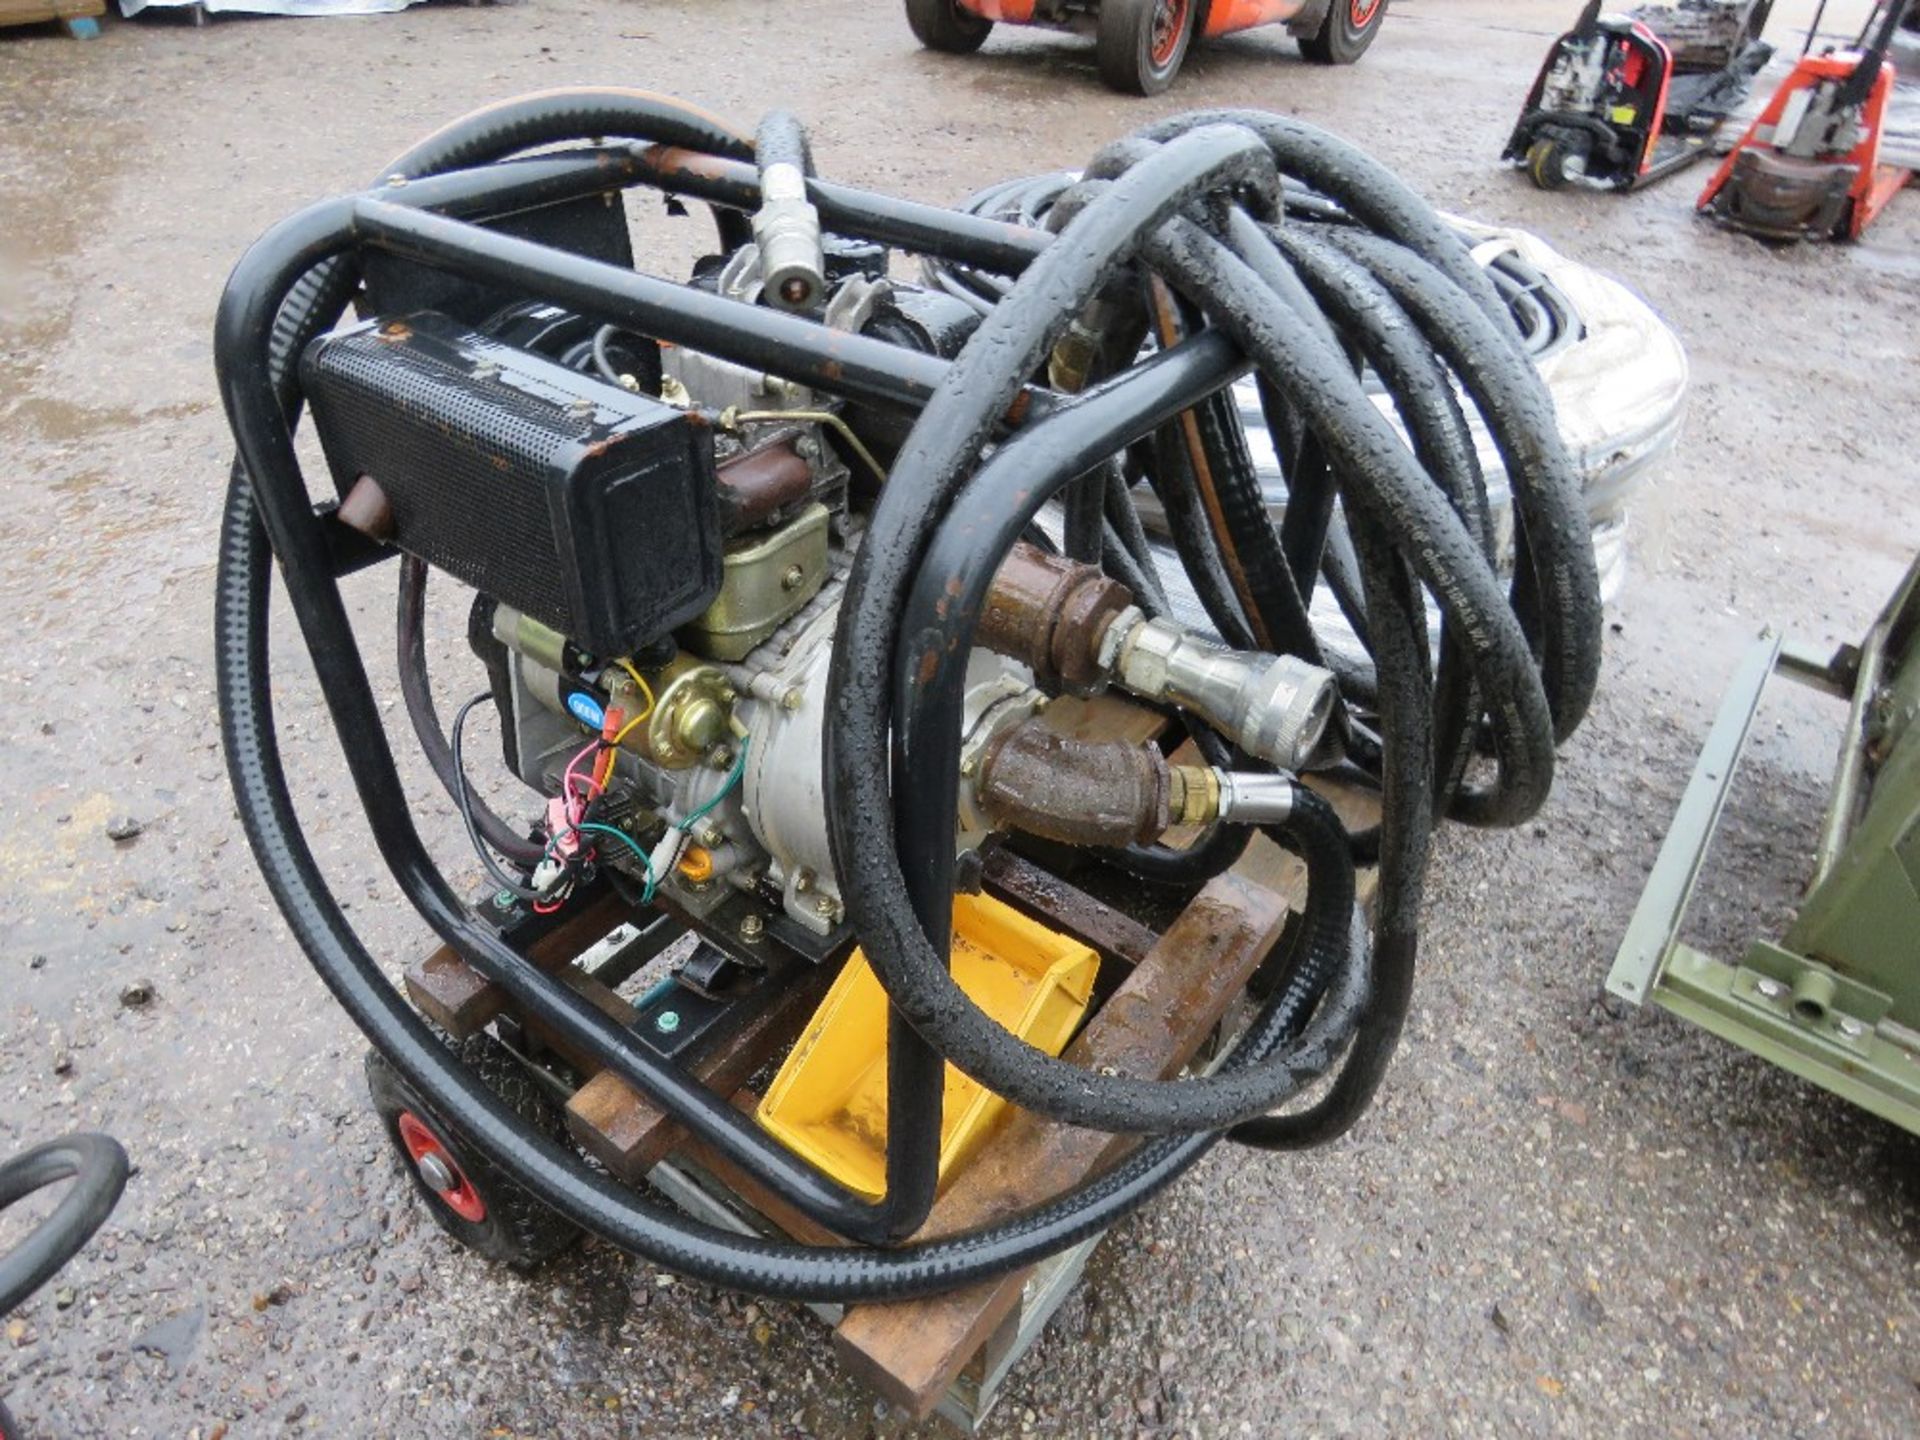 DIESEL ENGINED FUEL TRANSFER PUMP WITH HOSE. SOURCED FROM COMPANY LIQUIDATION. THIS LOT IS SOLD